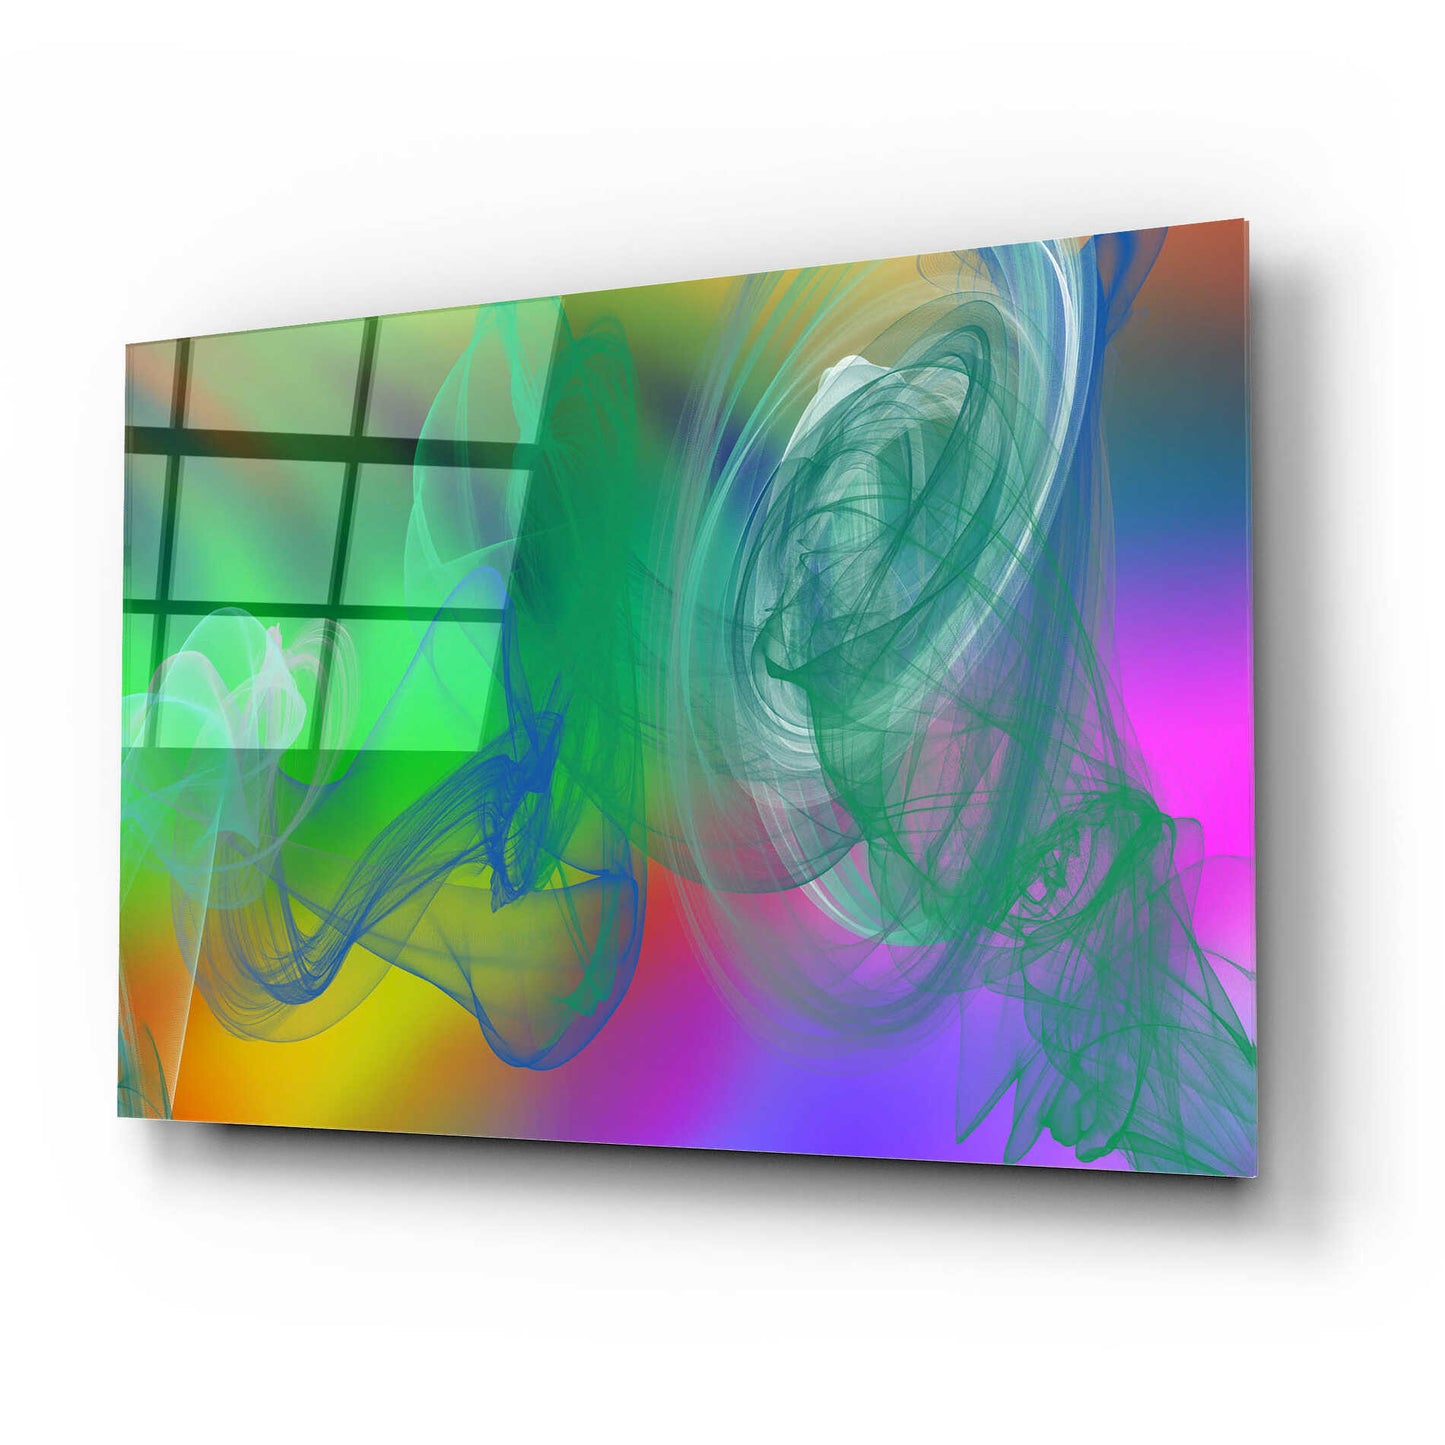 Epic Art 'Inverted Color In The Lines 5' by Irena Orlov Acrylic Glass Wall Art,24x16